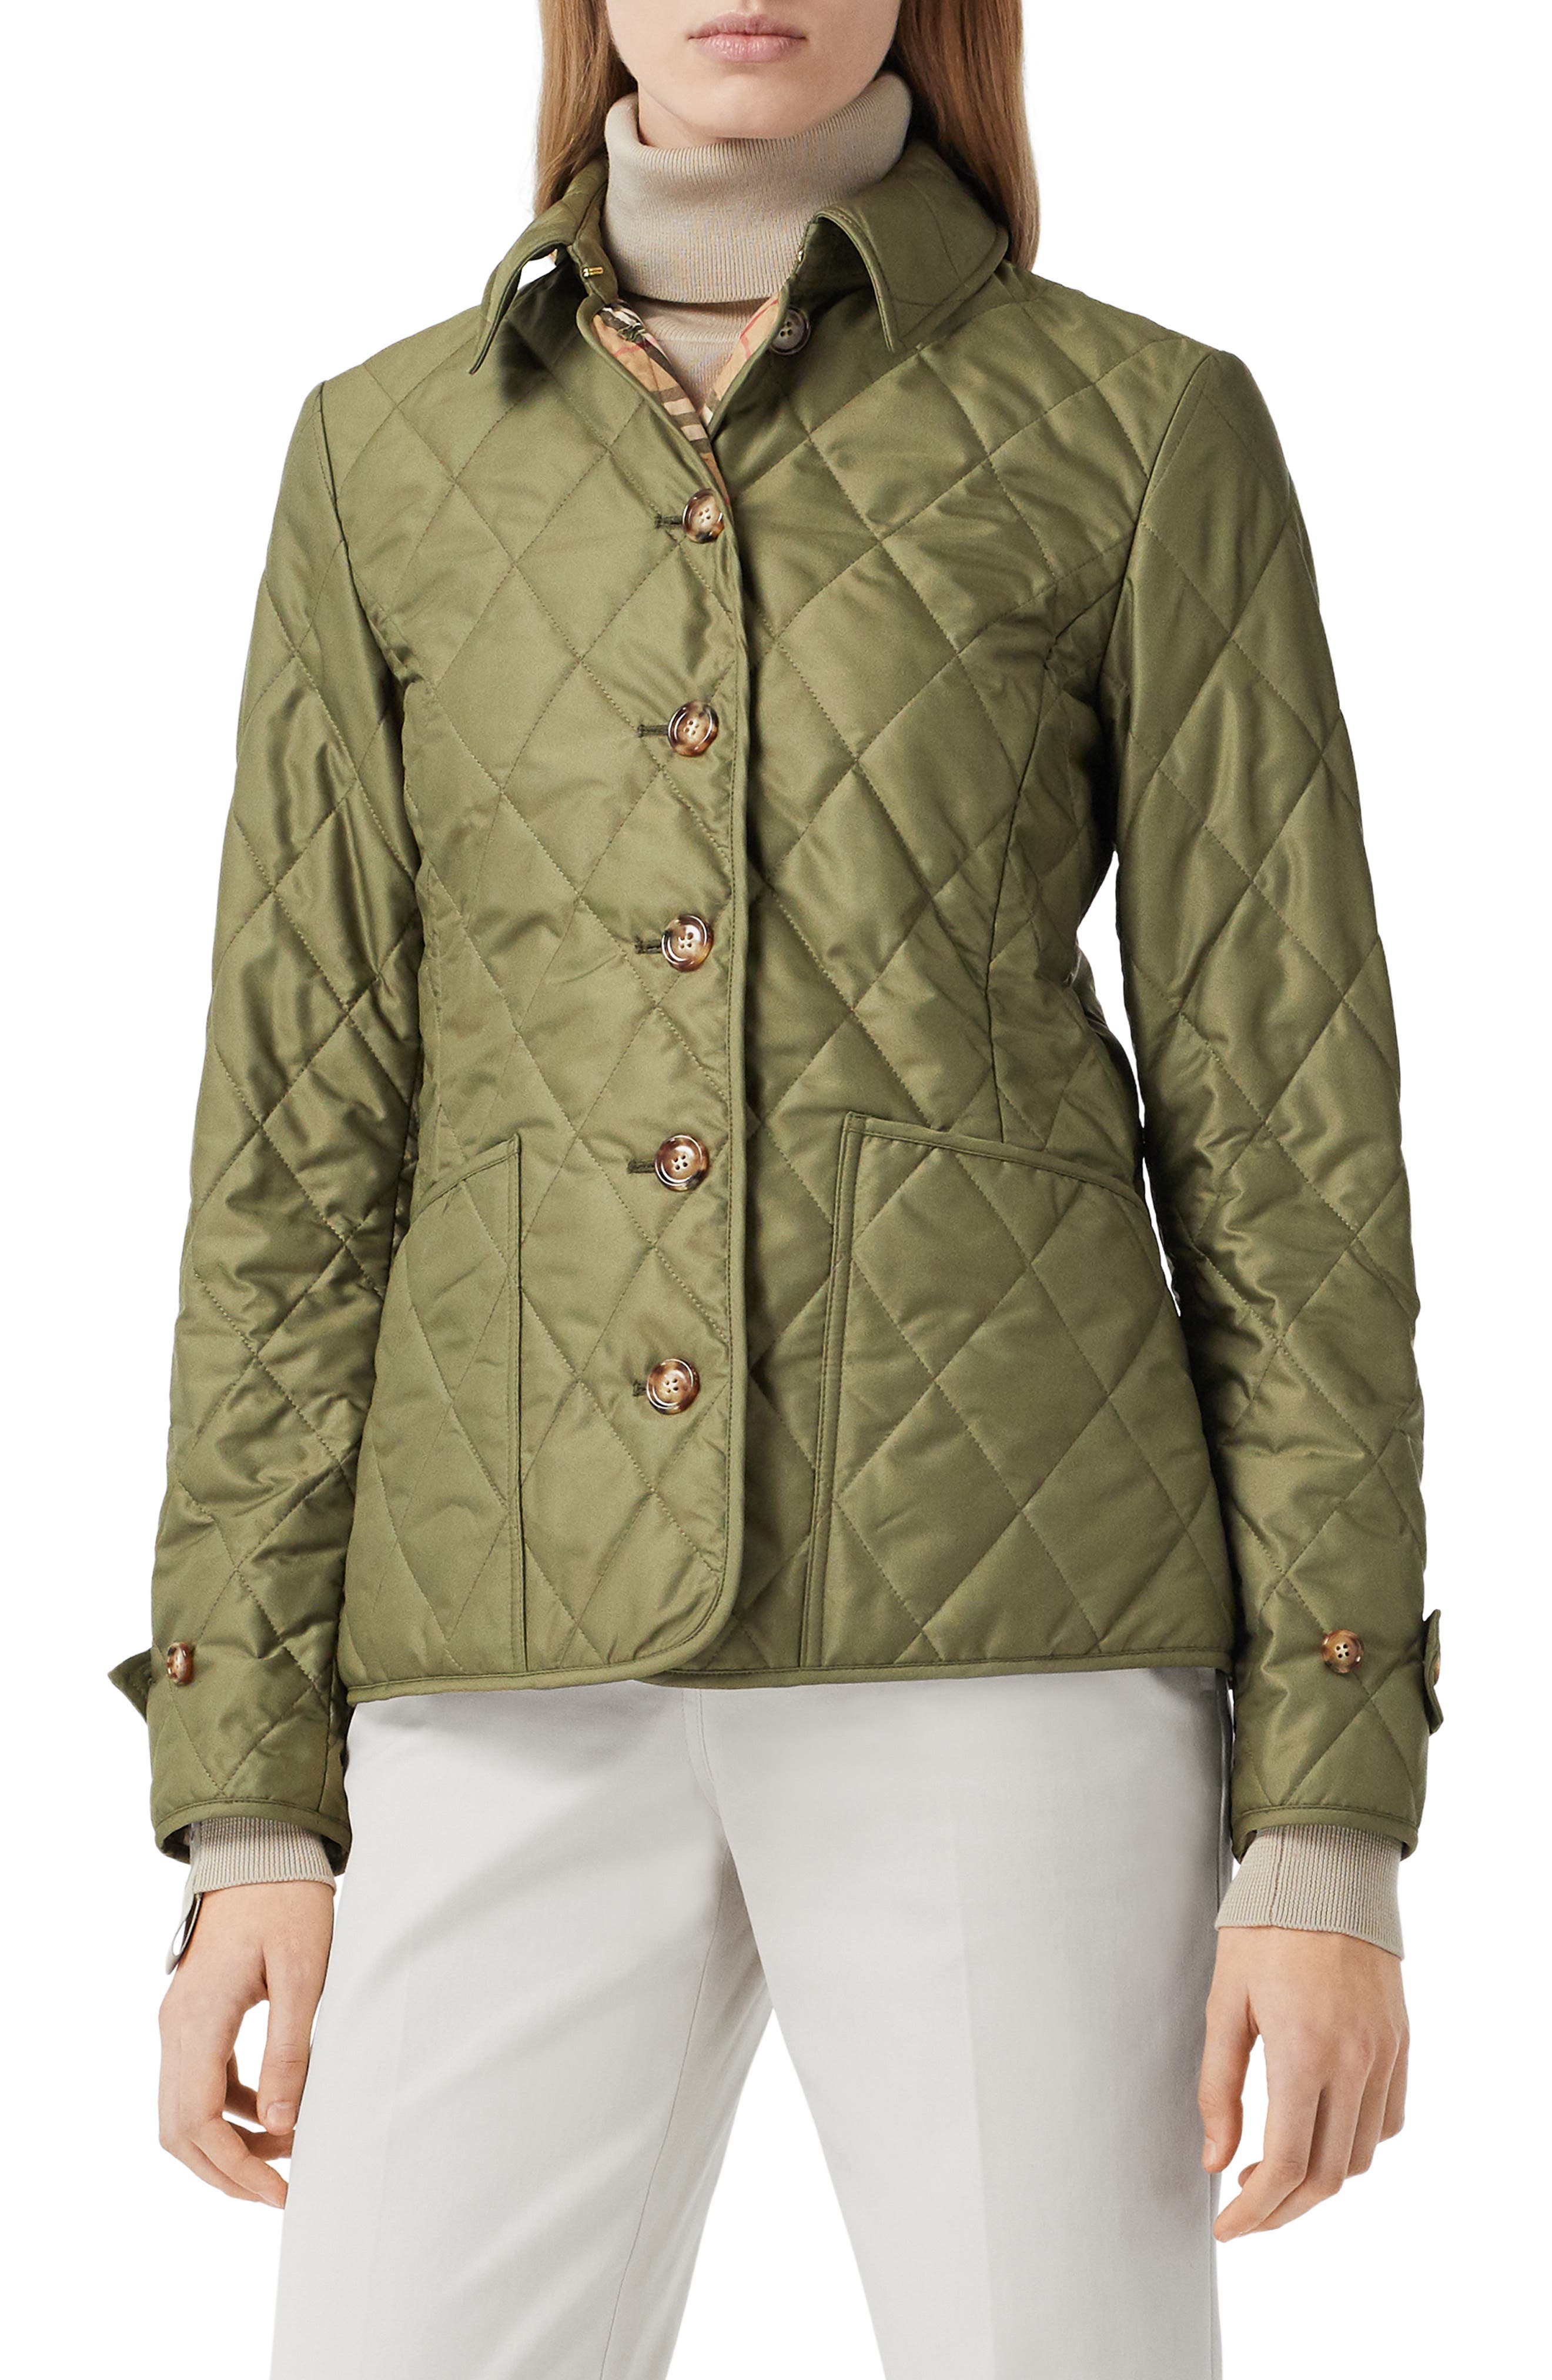 burberry olive green jacket